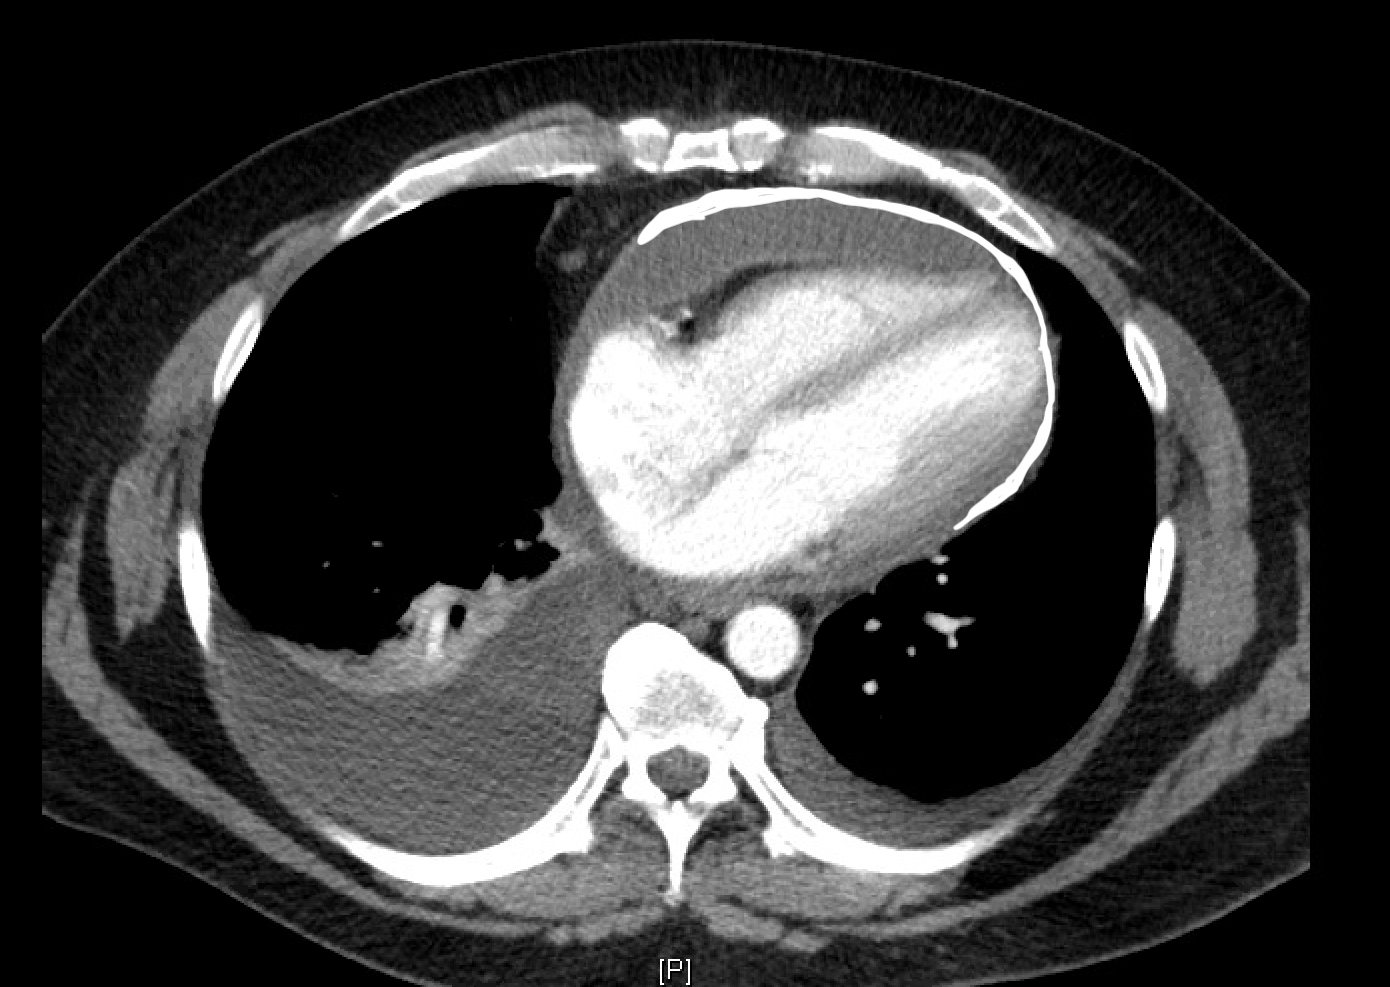 Pericardial calcification and pericardial thickening (maximum anterior thickness 2.2 cm) in a patient with constrictive pericarditis.